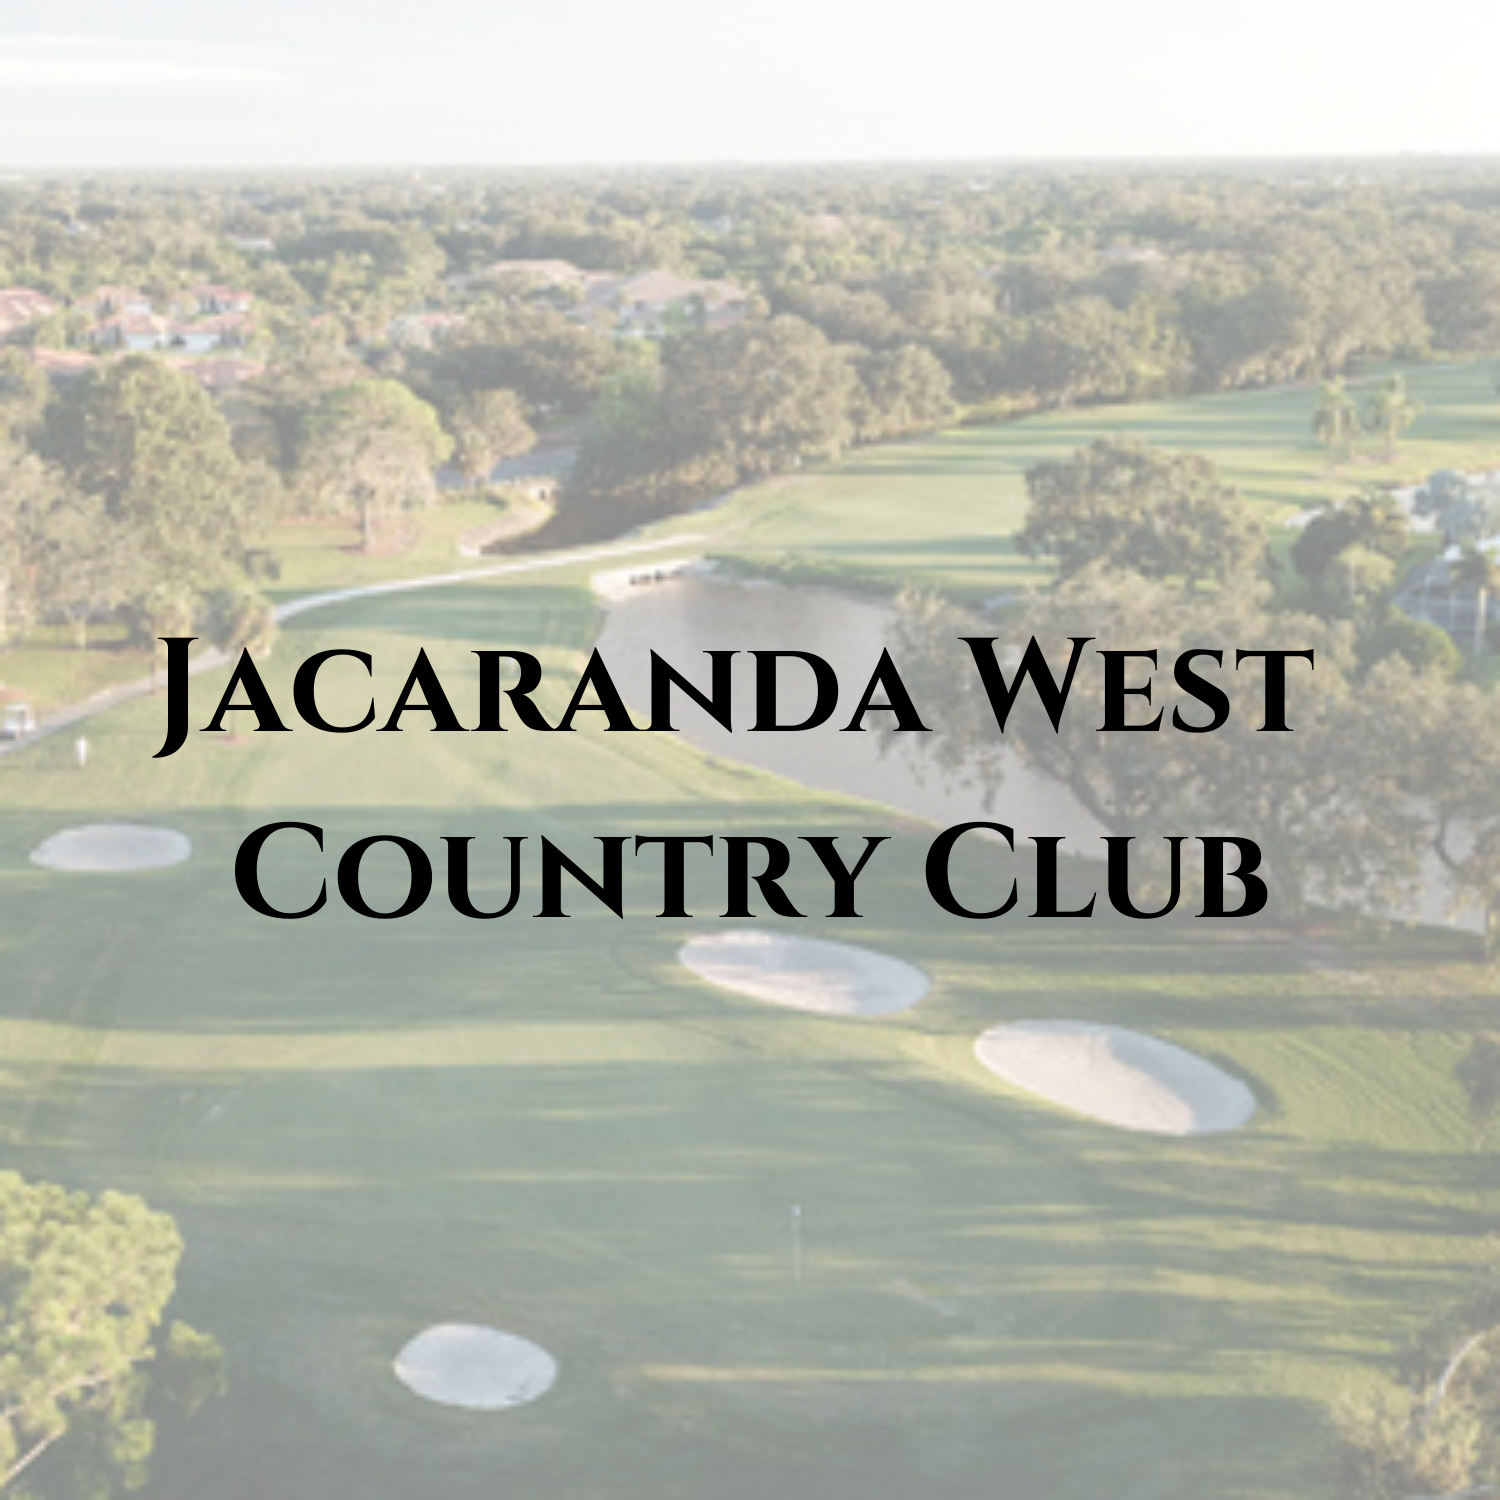 Jacaranda West Country Club 1x1 for website button.png